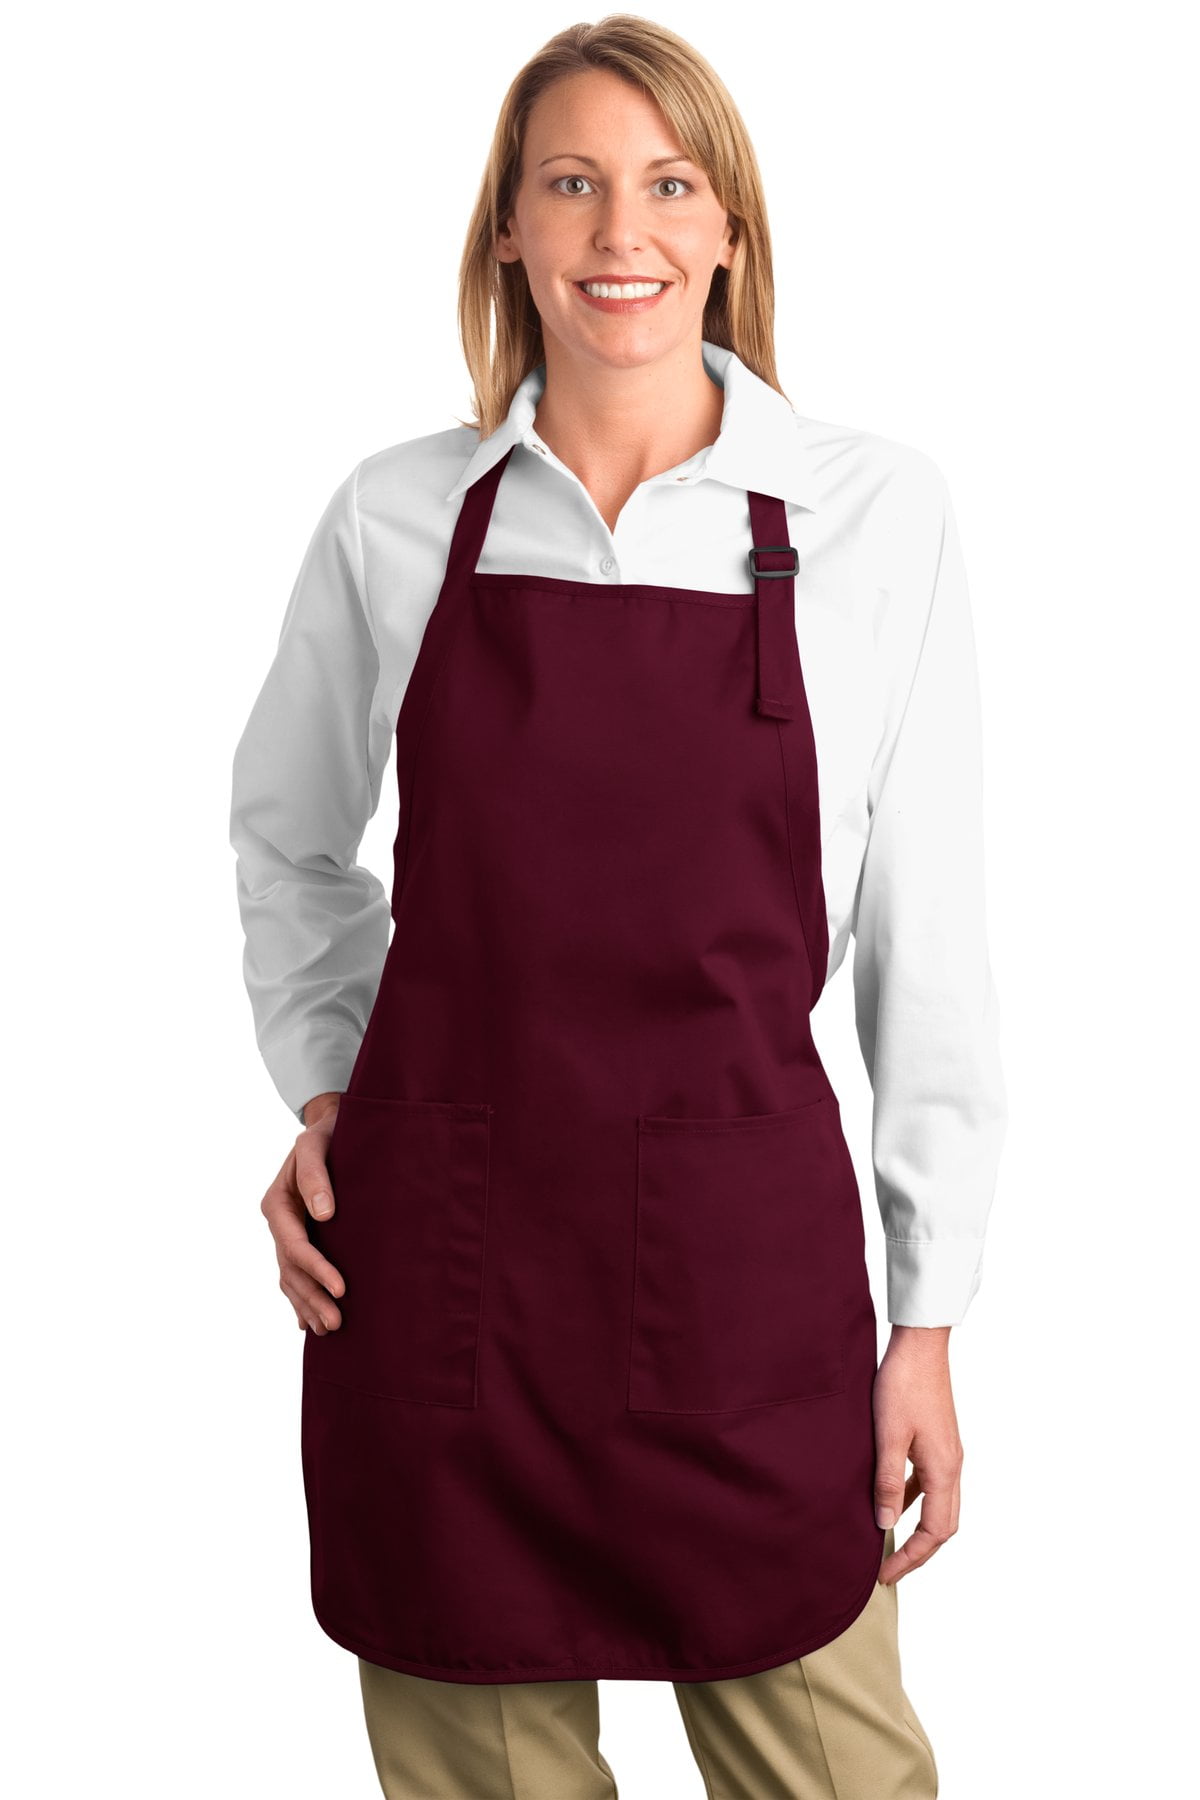 in Cotton/Twill Pocket central Apron Cook Cotton 10 Piece Kit 